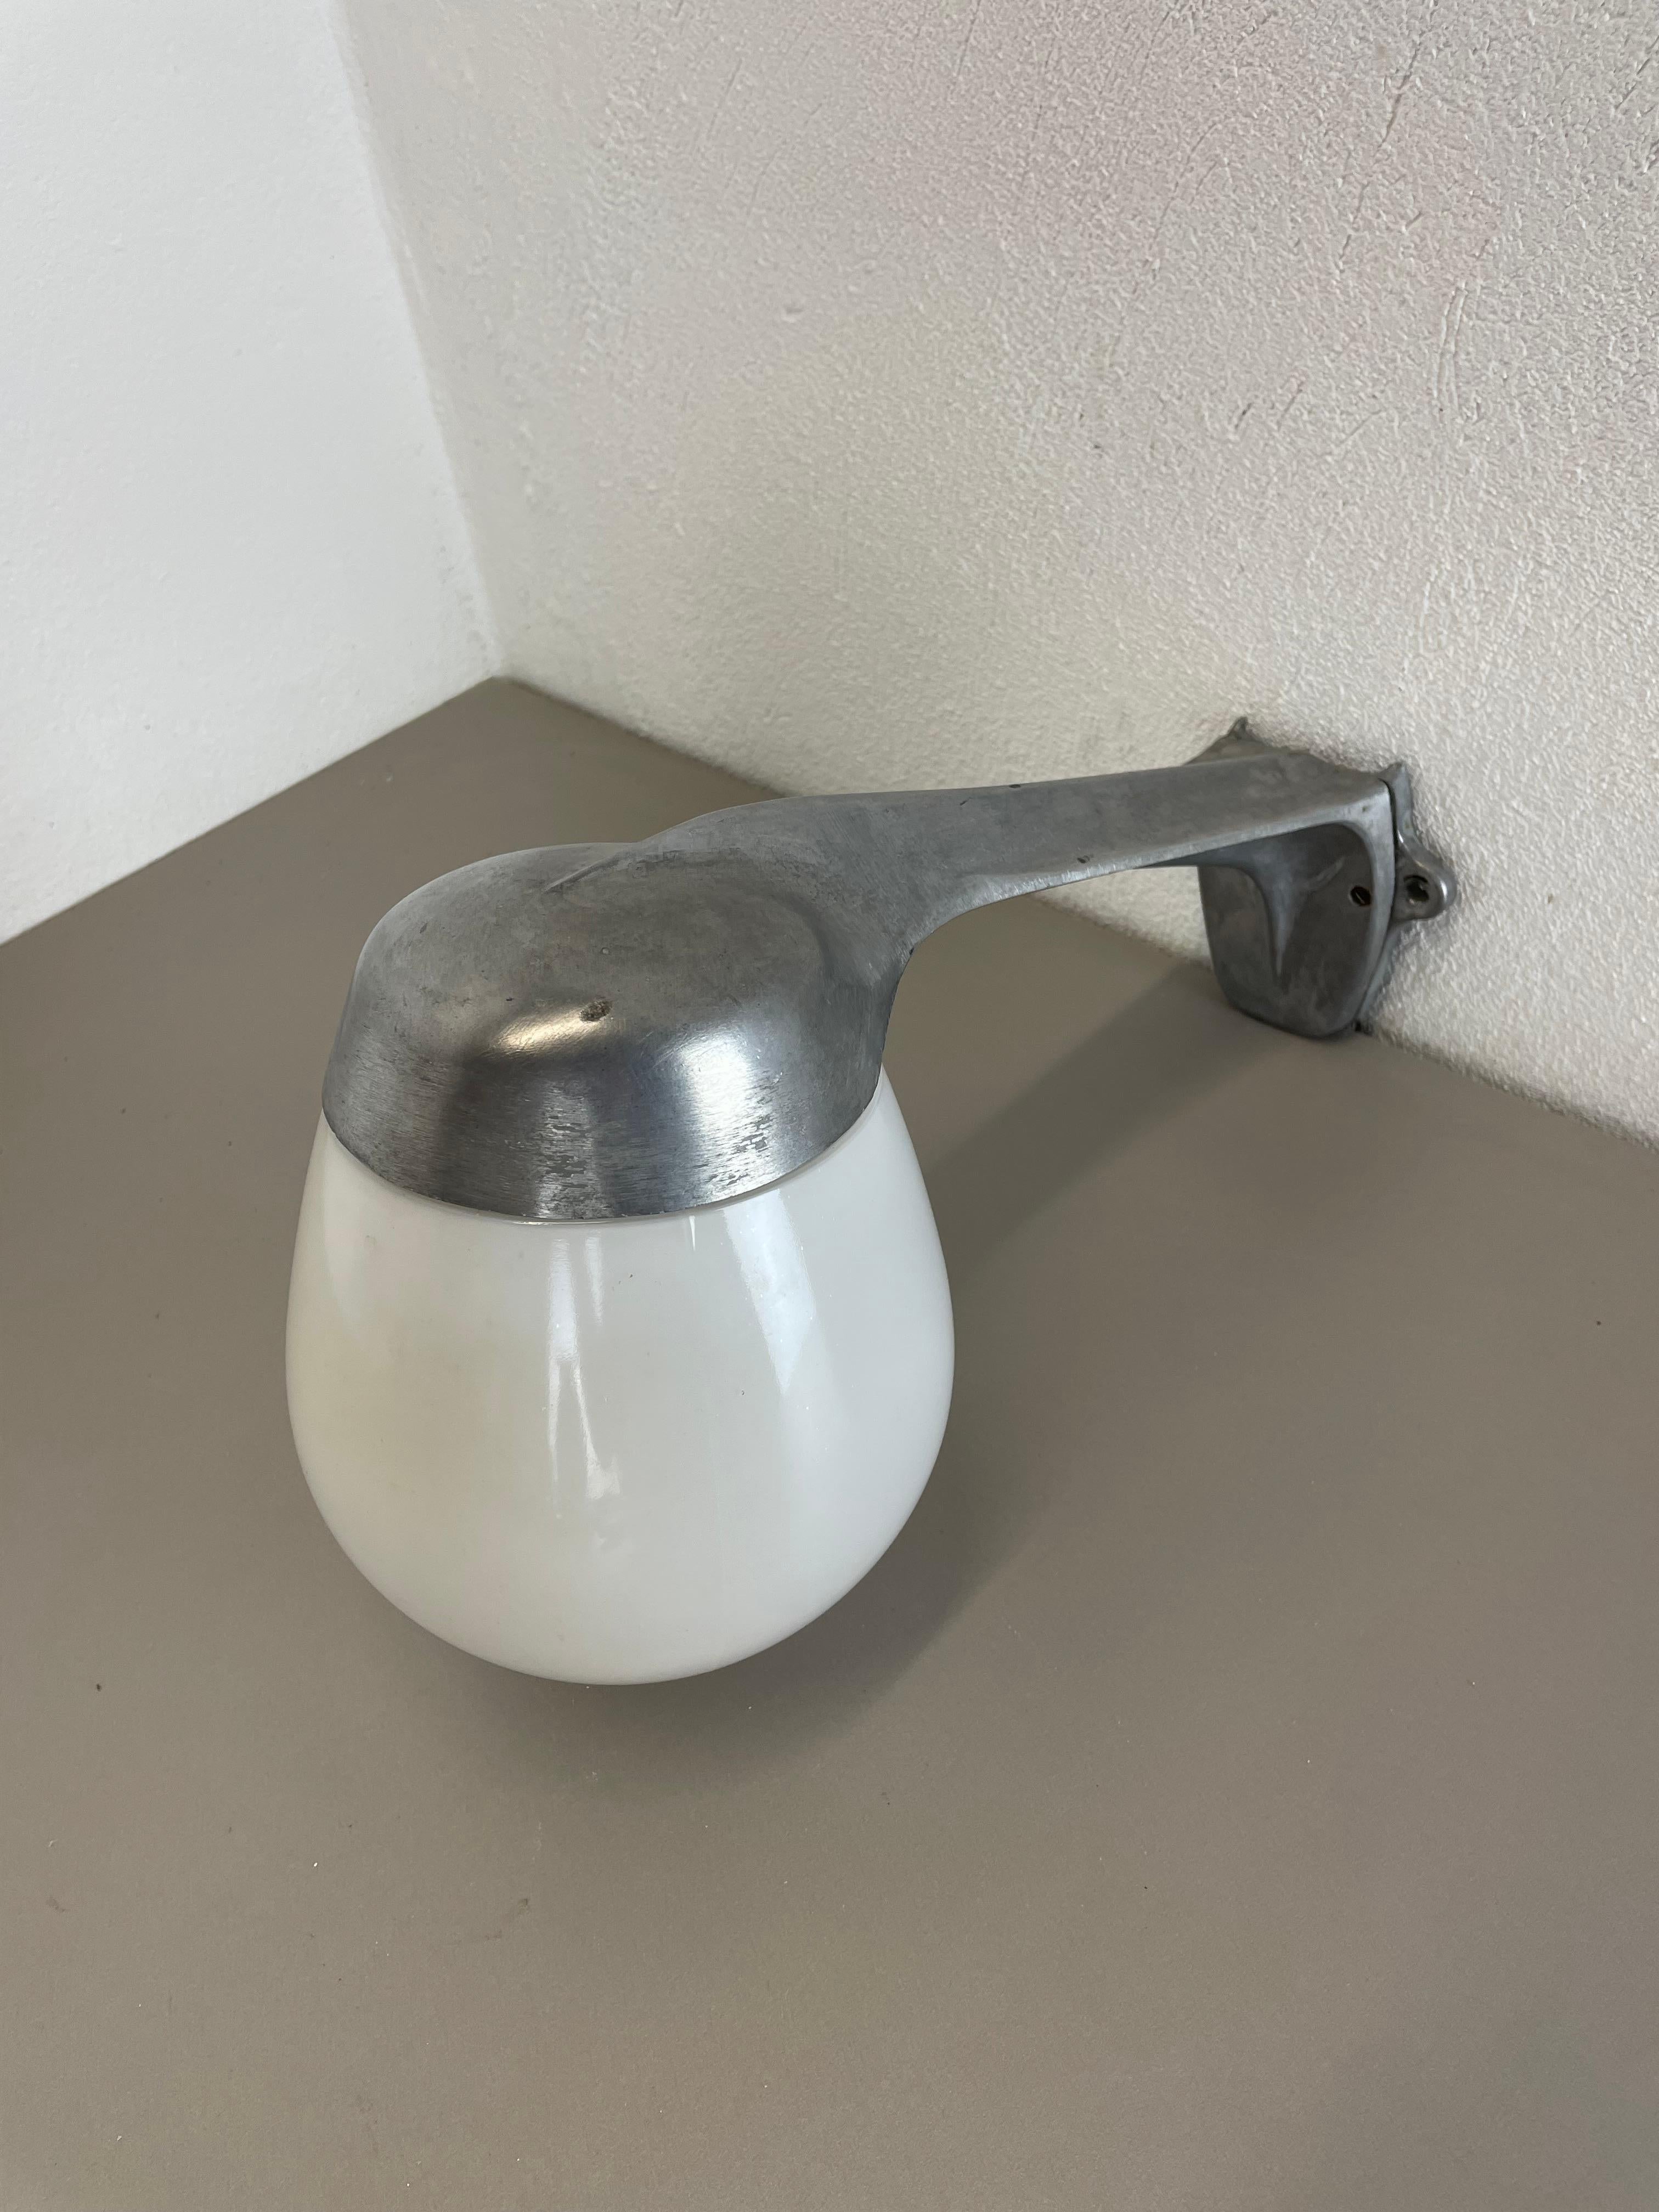 Article:

wall light


Design:

Wilhelm Wagenfeld



Producer:

Lindner Gmbh, Germany



Age:

1950s


Model:

WV 366





Original vintage wall light designed by Wilhelm Wagenfeld and produced by Lindner Gmbh, Germany in the 1950s. It is the model